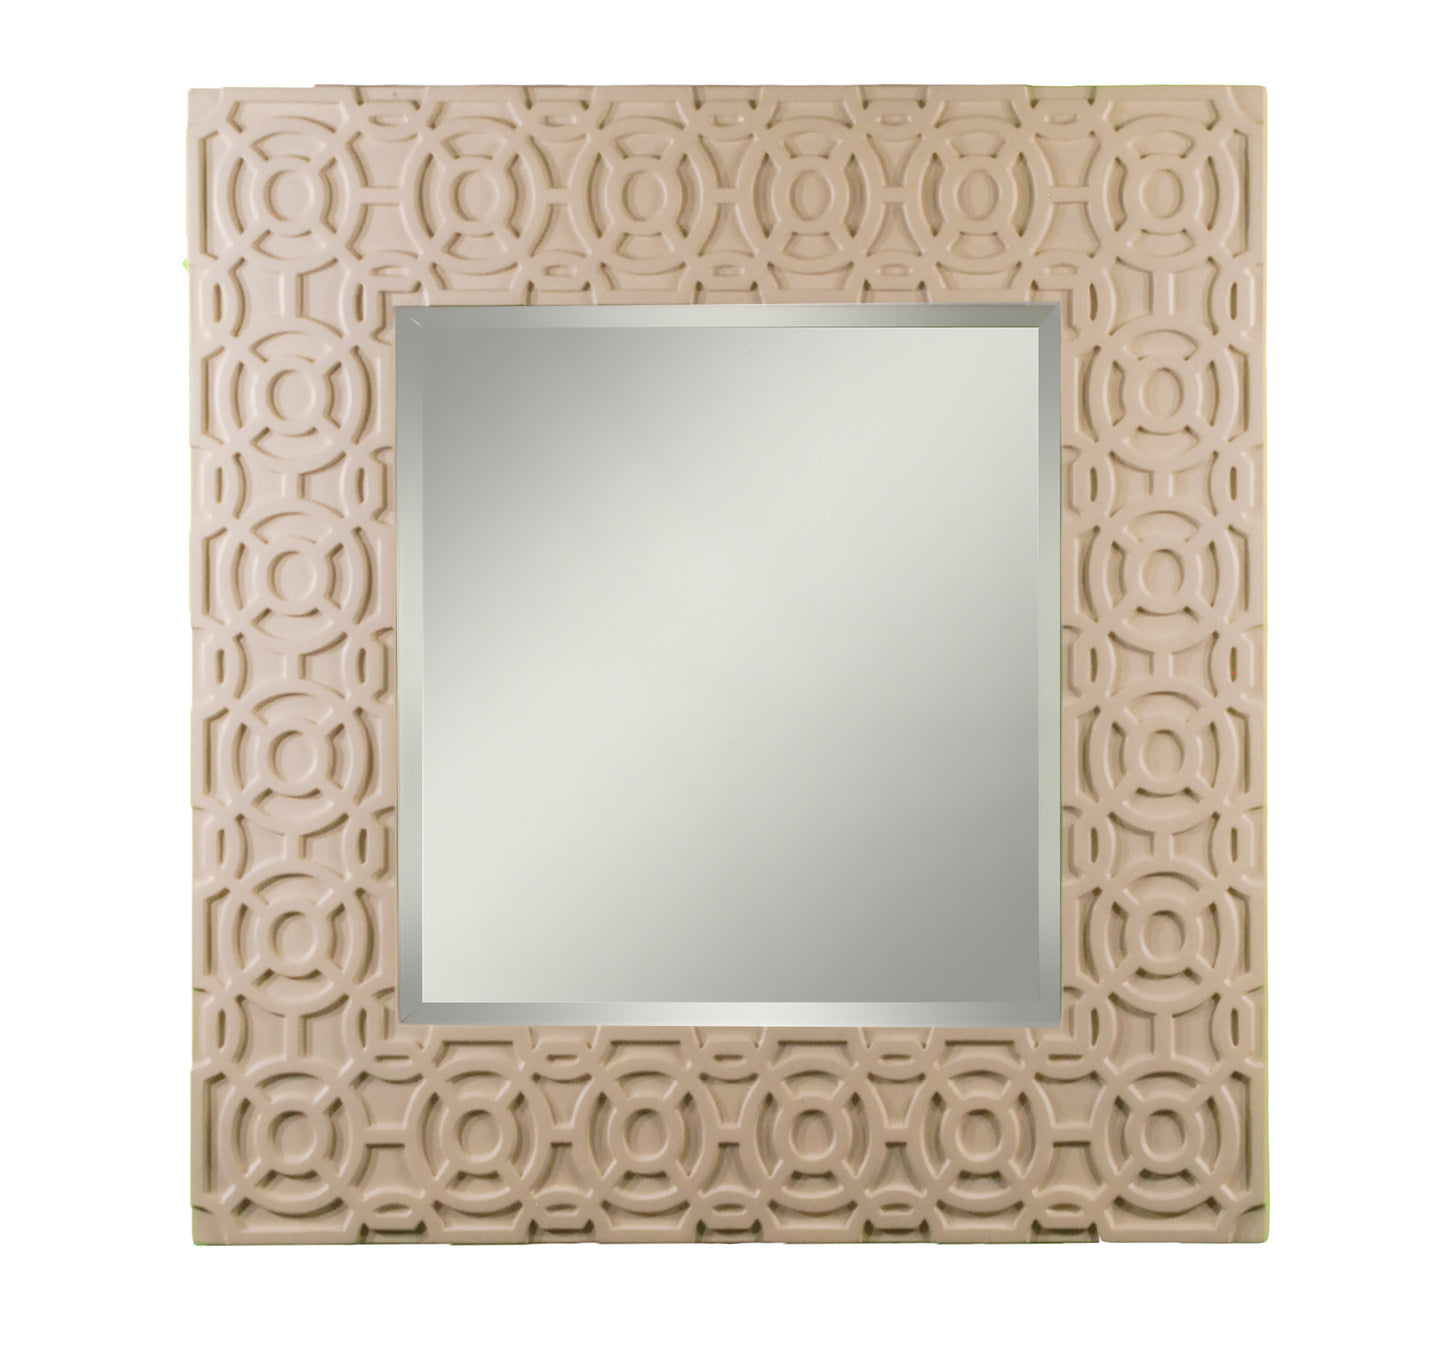 Square mirror with carved frame detail